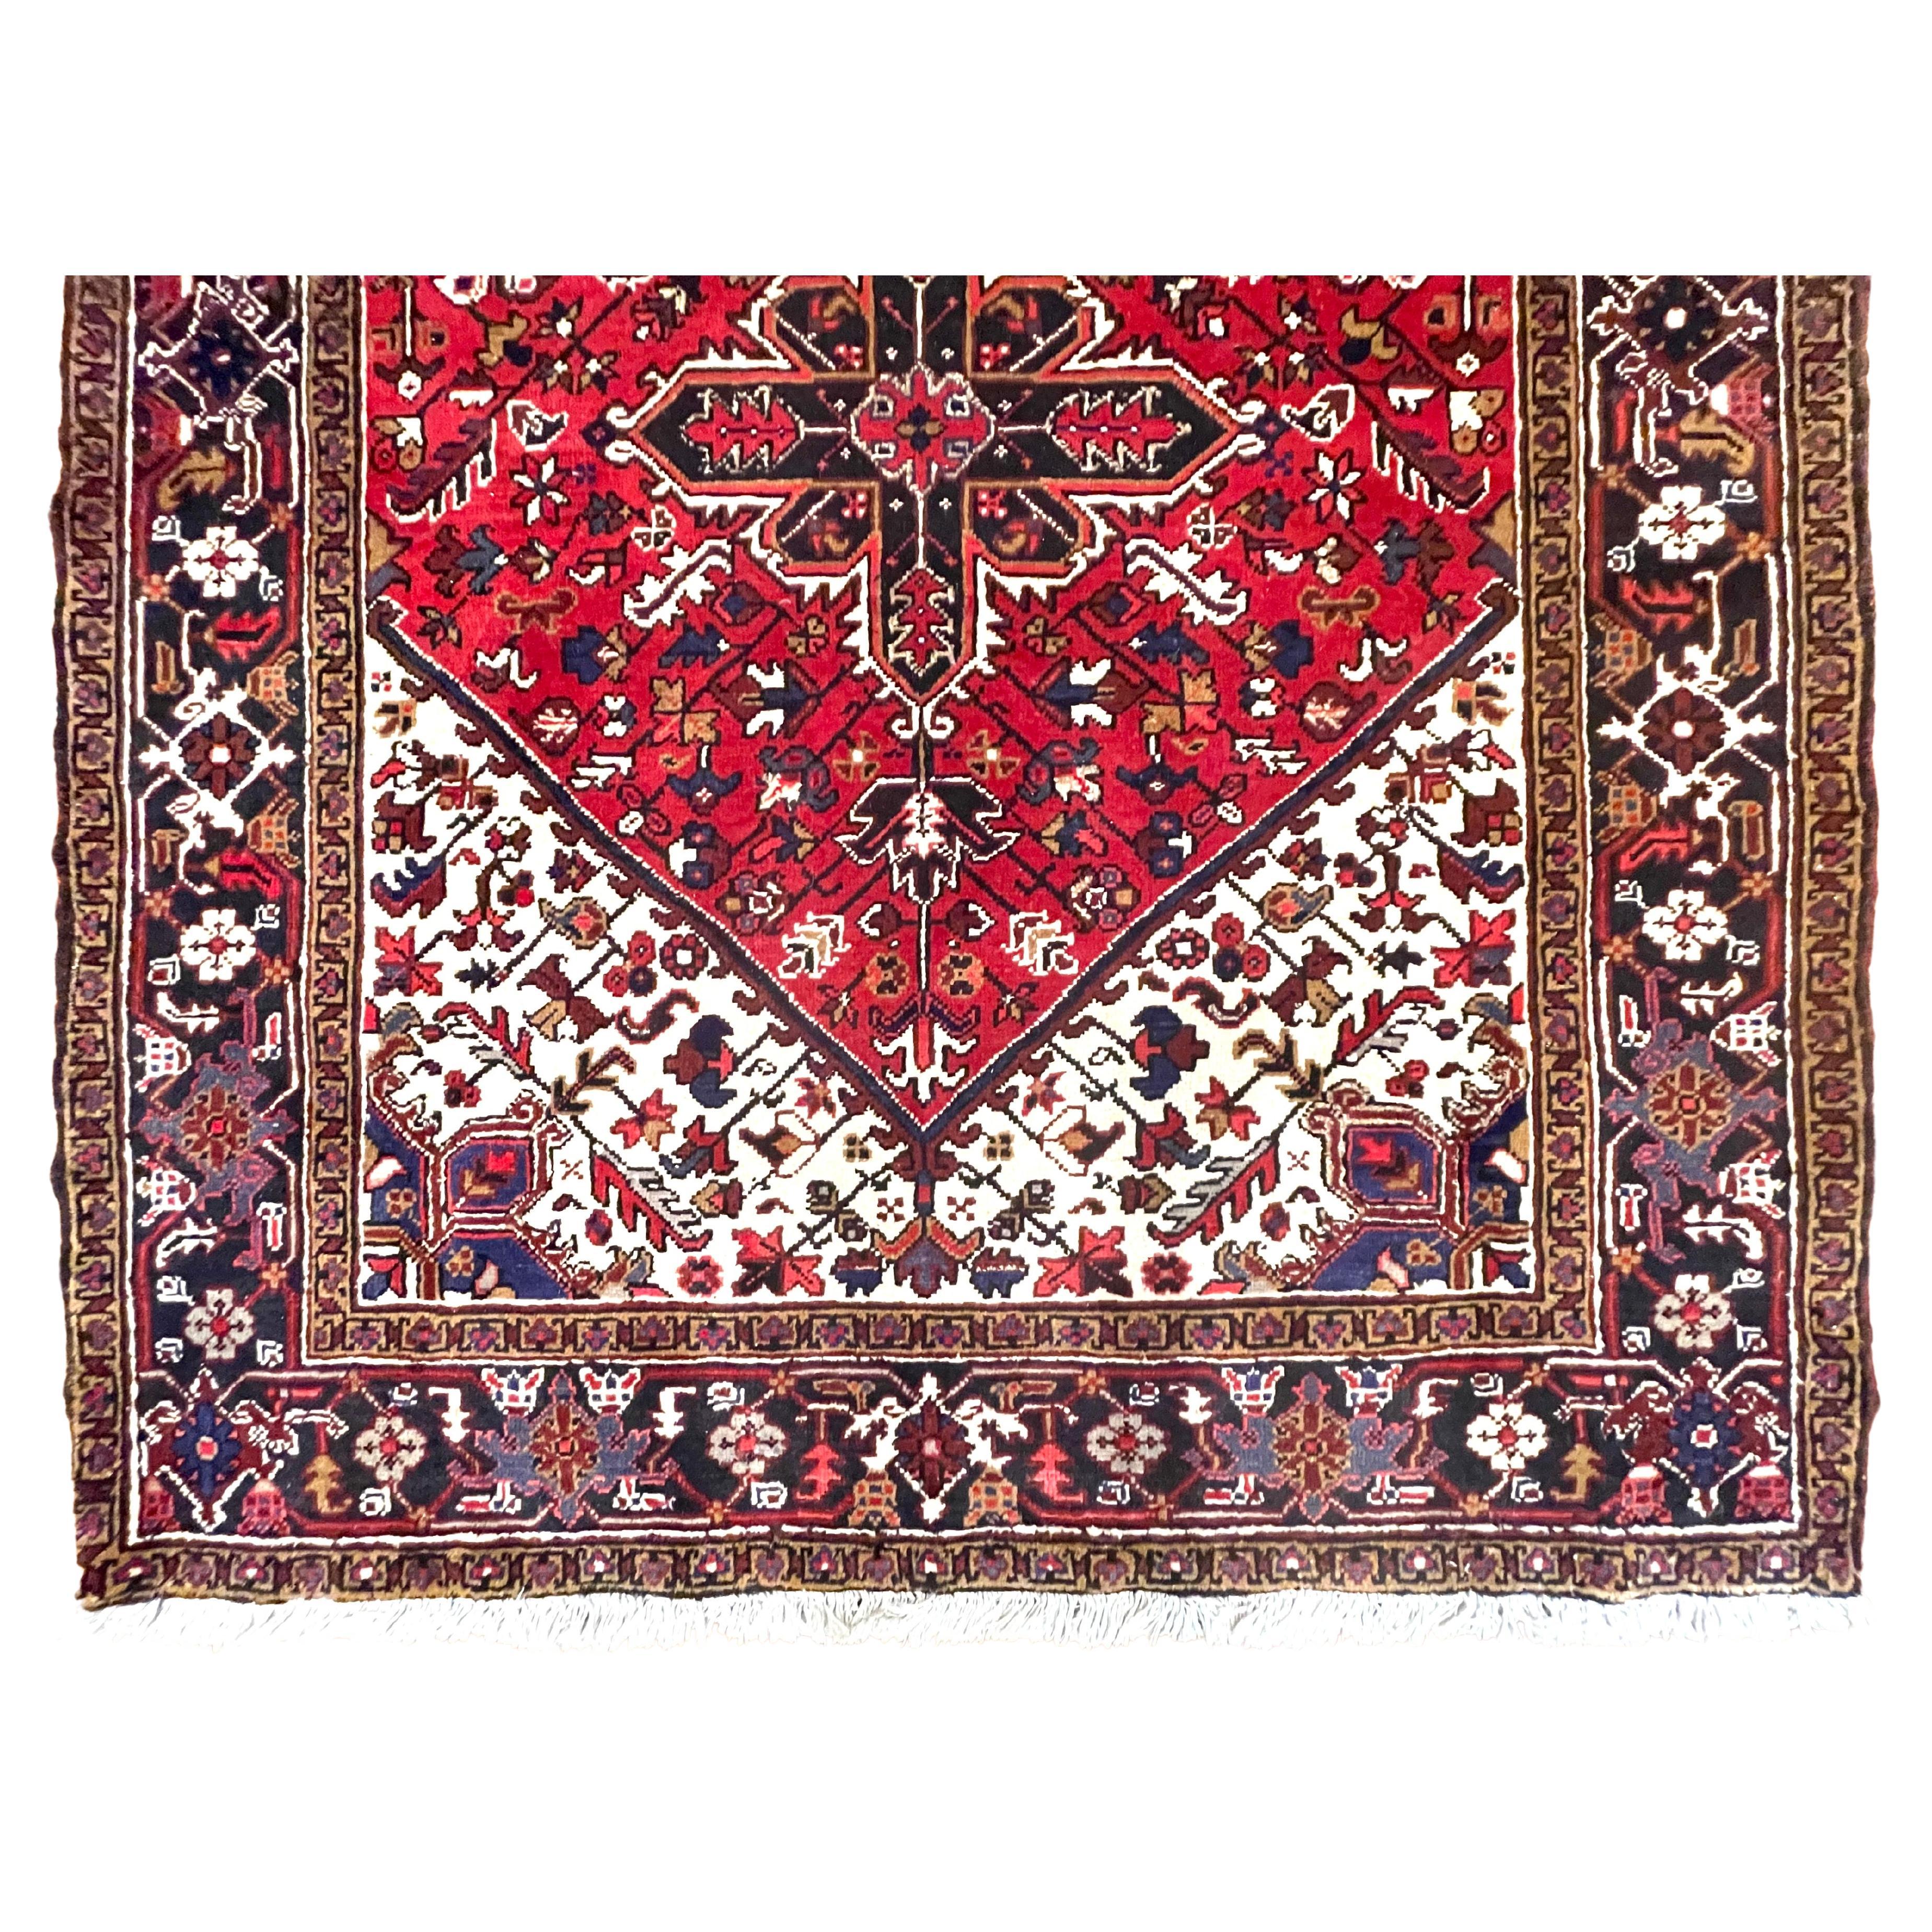 Introducing Persian Heriz rug, Heriz rugs are Persian rugs from the area of Heriz, East Azerbaijan in northwest Iran, northeast of Tabriz. This rug has wool pile and cotton foundation, hand knotted with a very good condition for its age. This rug